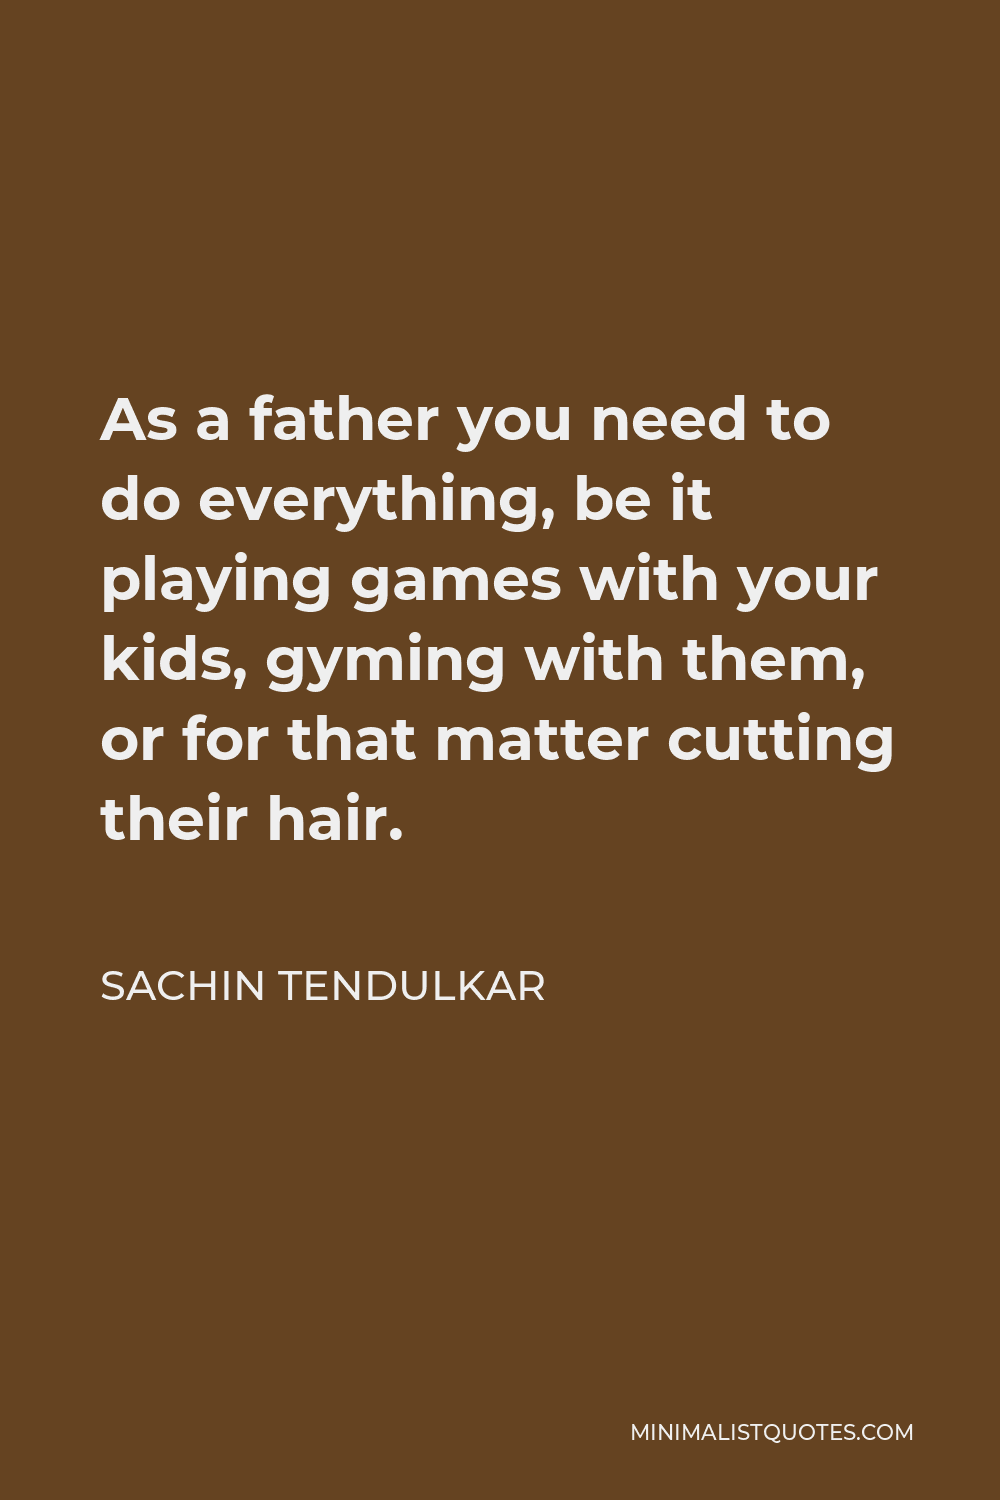 Sachin Tendulkar Quote - As a father you need to do everything, be it playing games with your kids, gyming with them, or for that matter cutting their hair.